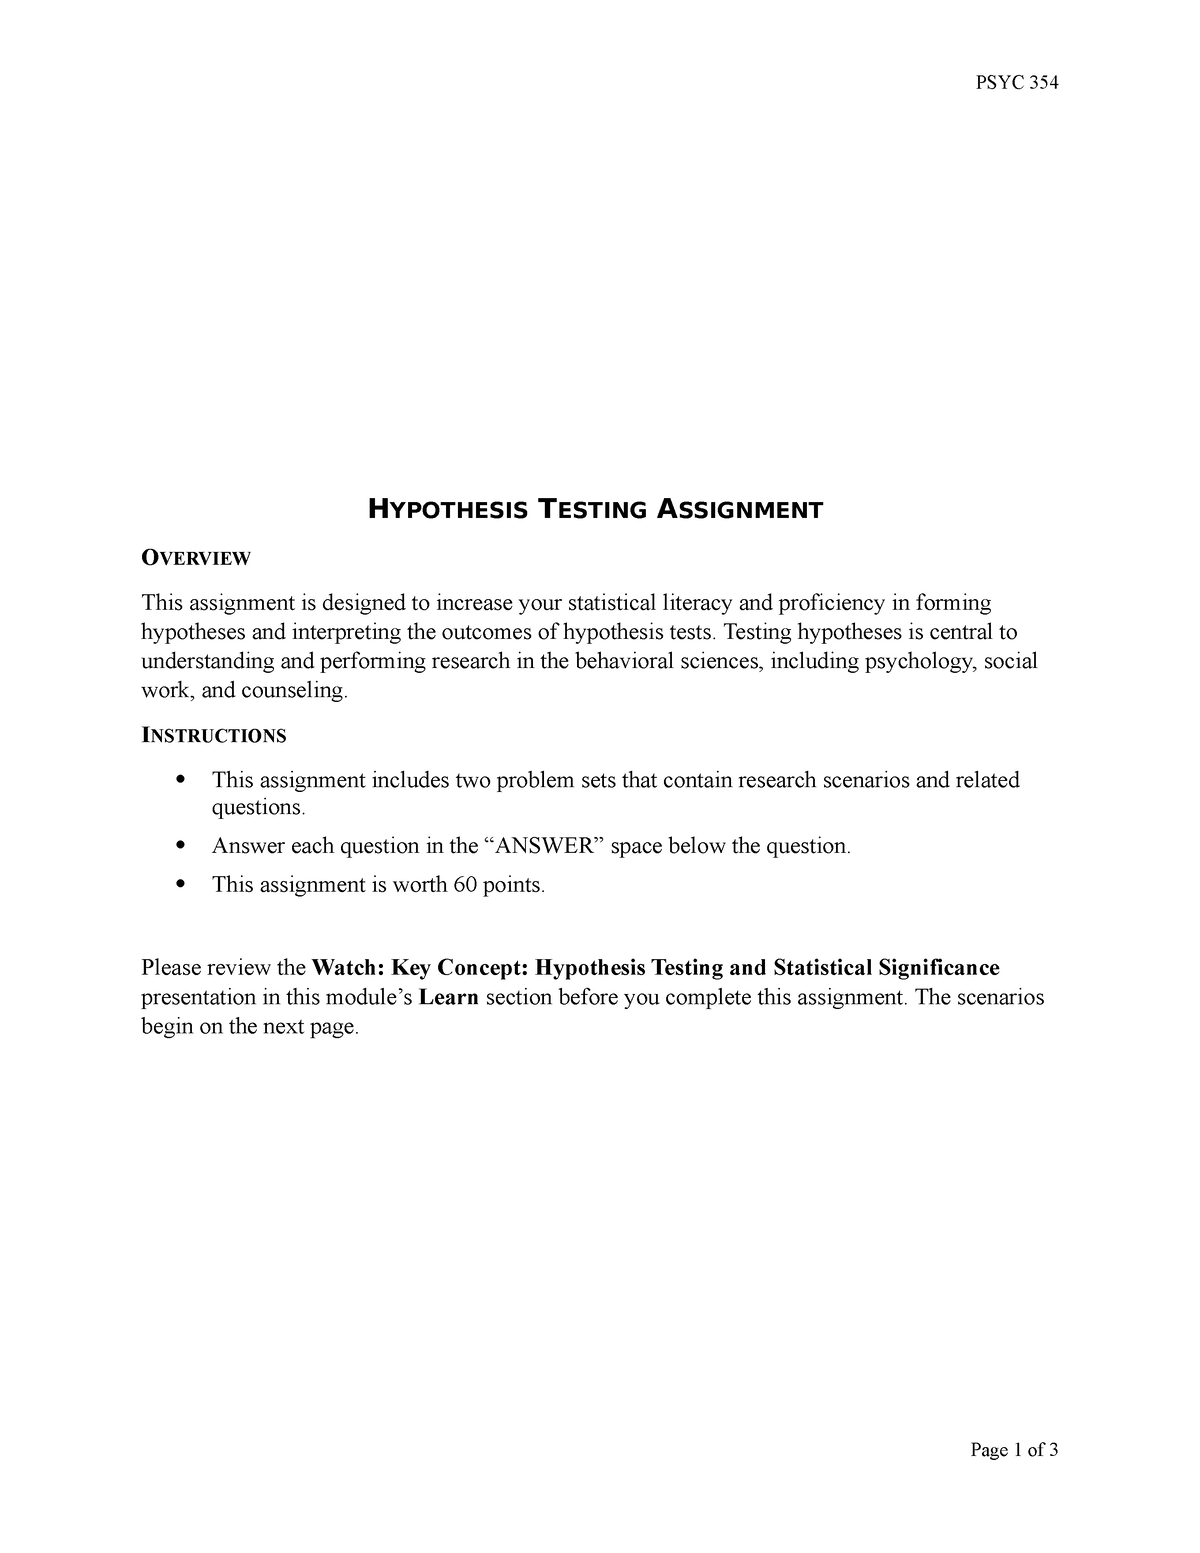 hypothesis testing assignment psyc 354